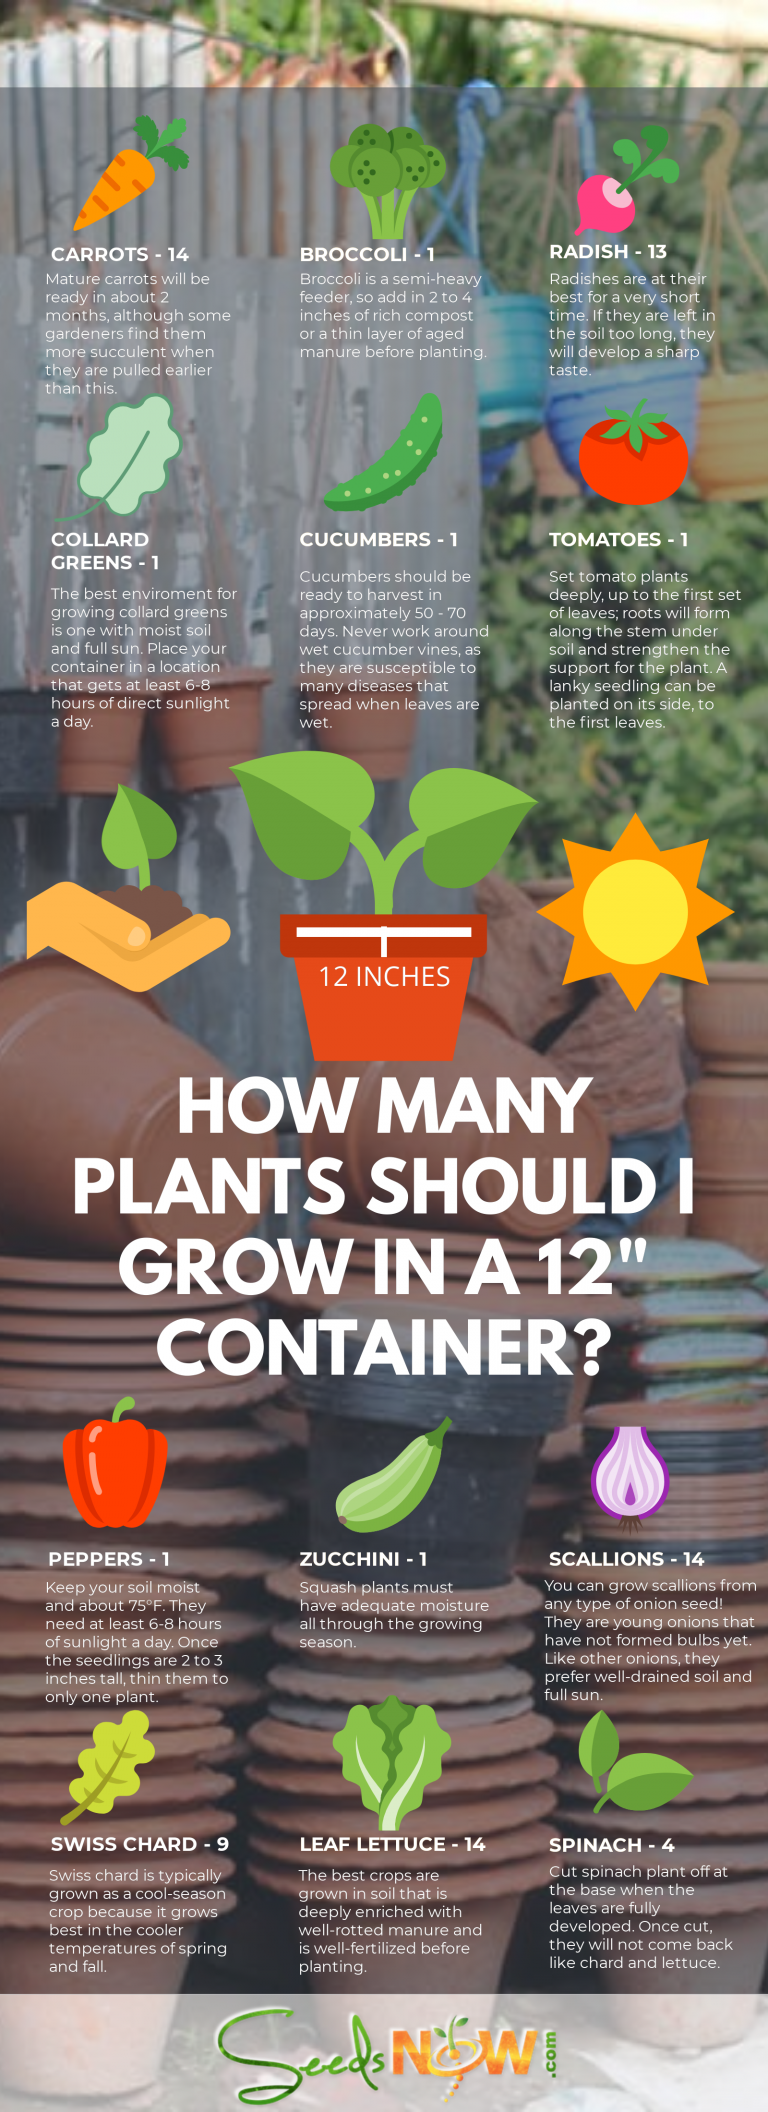 How Many Plants Can You Grow in a 12″ Container? Urban Organic Gardener